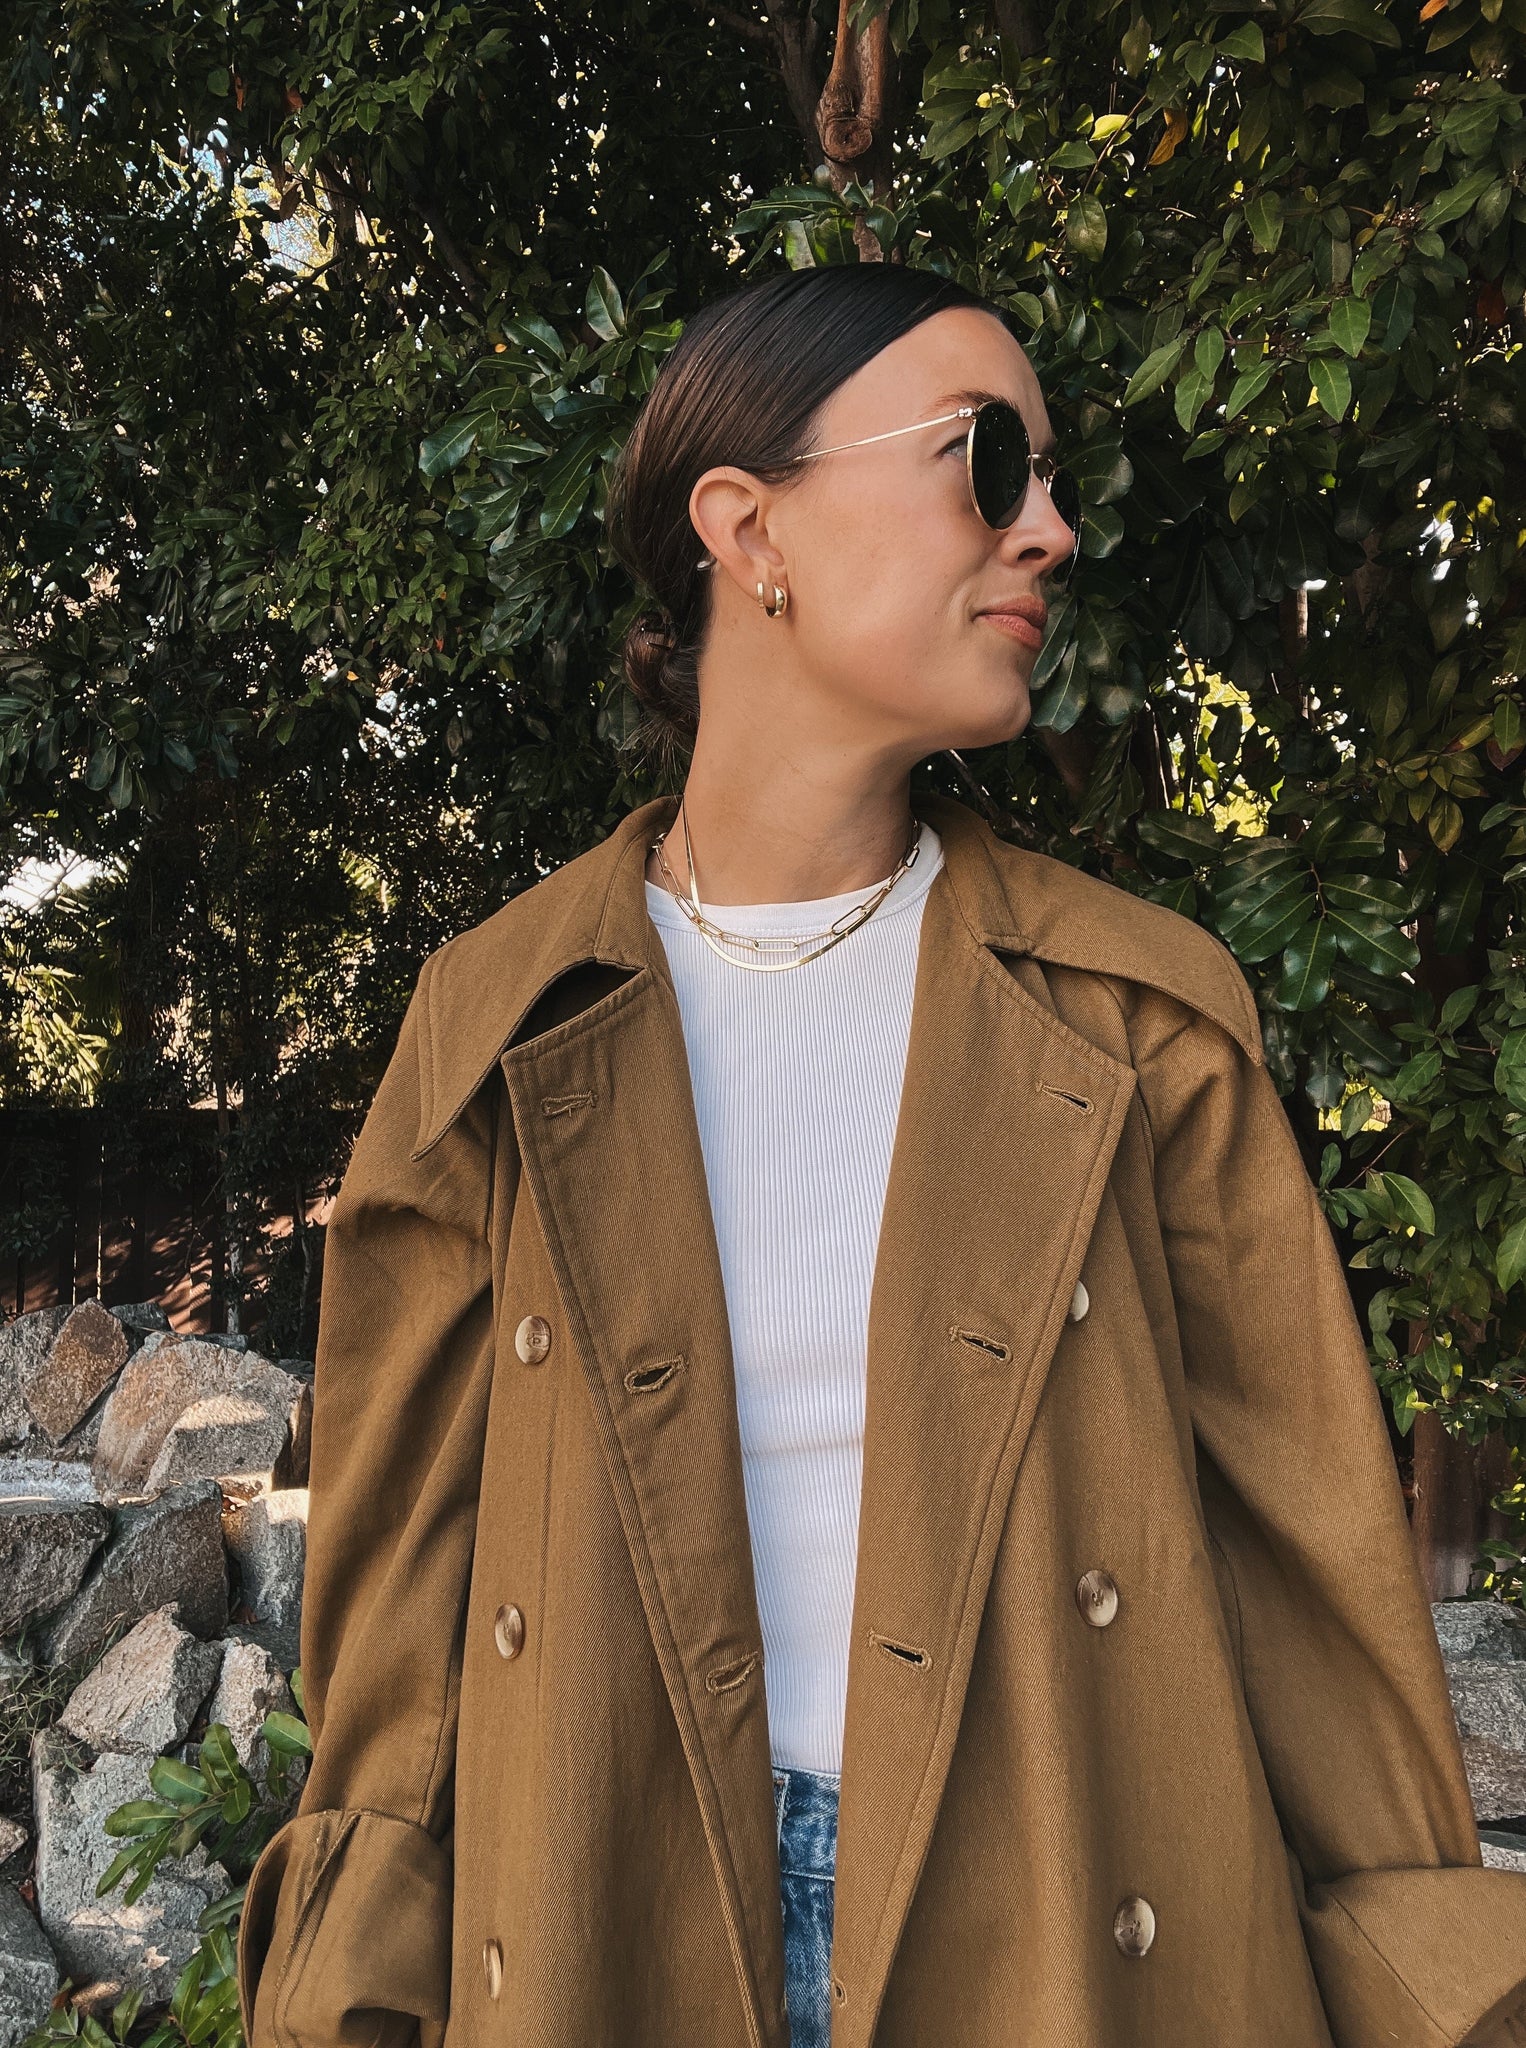 A woman wearing a Marin Trench Coat - Olive made in India tan trench coat made of cotton twill and matching jeans.